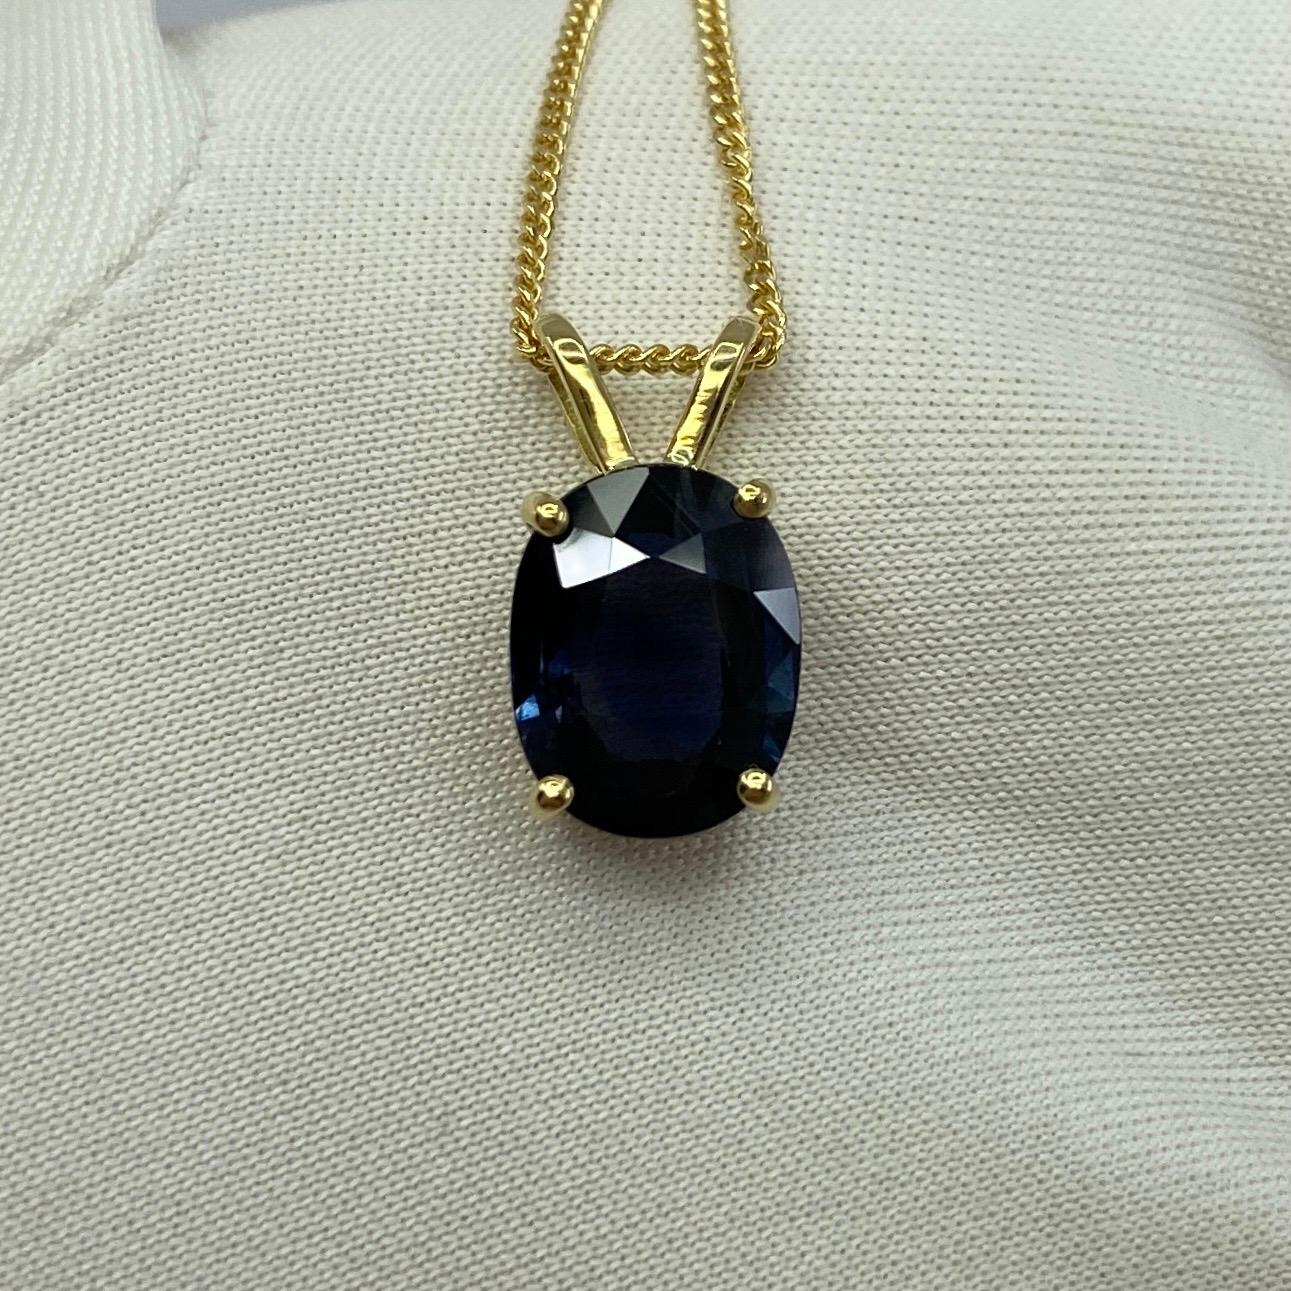 GIA Certified 2.51ct Untreated Deep Blue Sapphire Oval 18k Yellow Gold Pendant 1